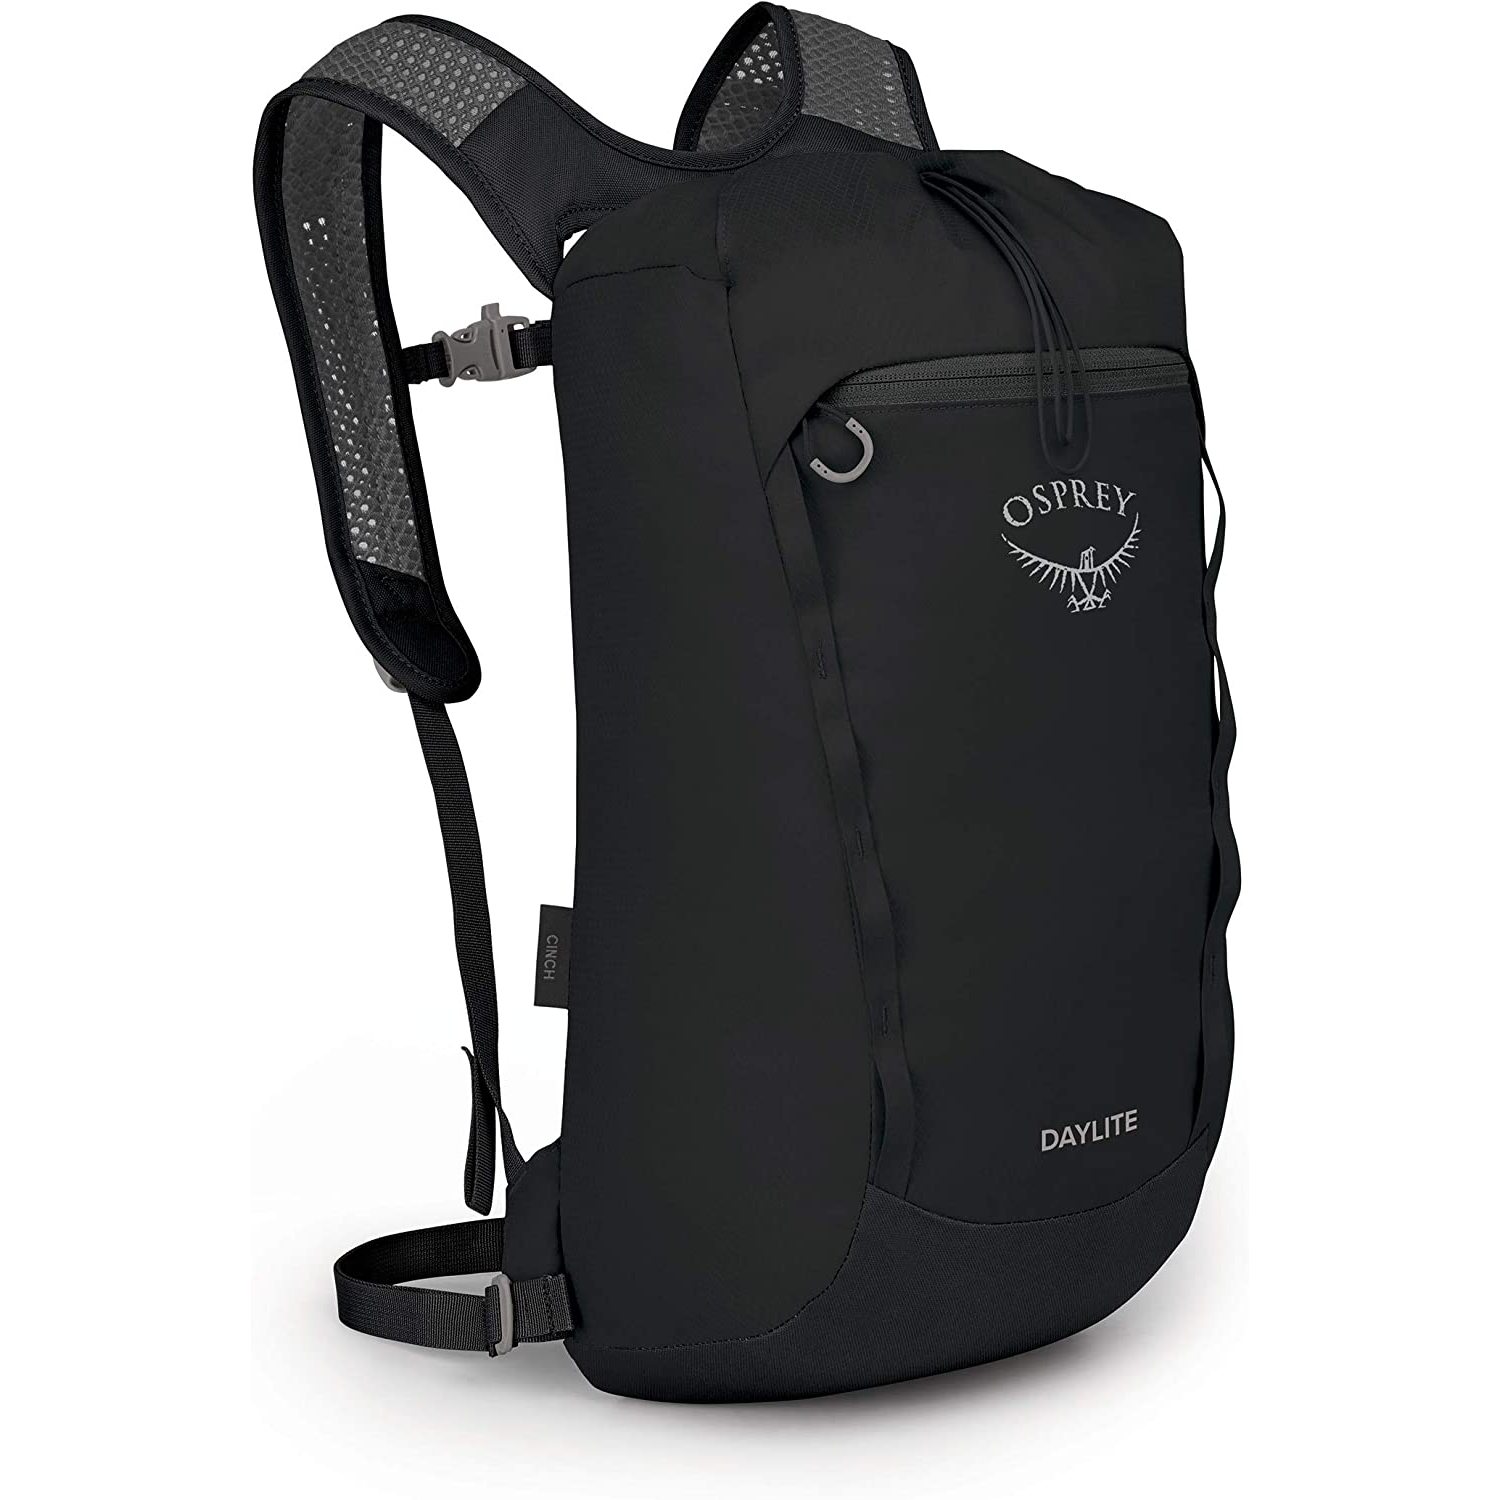 Daylite Cinch Backpack , Black, Top-loading access with cinch closing system - image 1 of 7